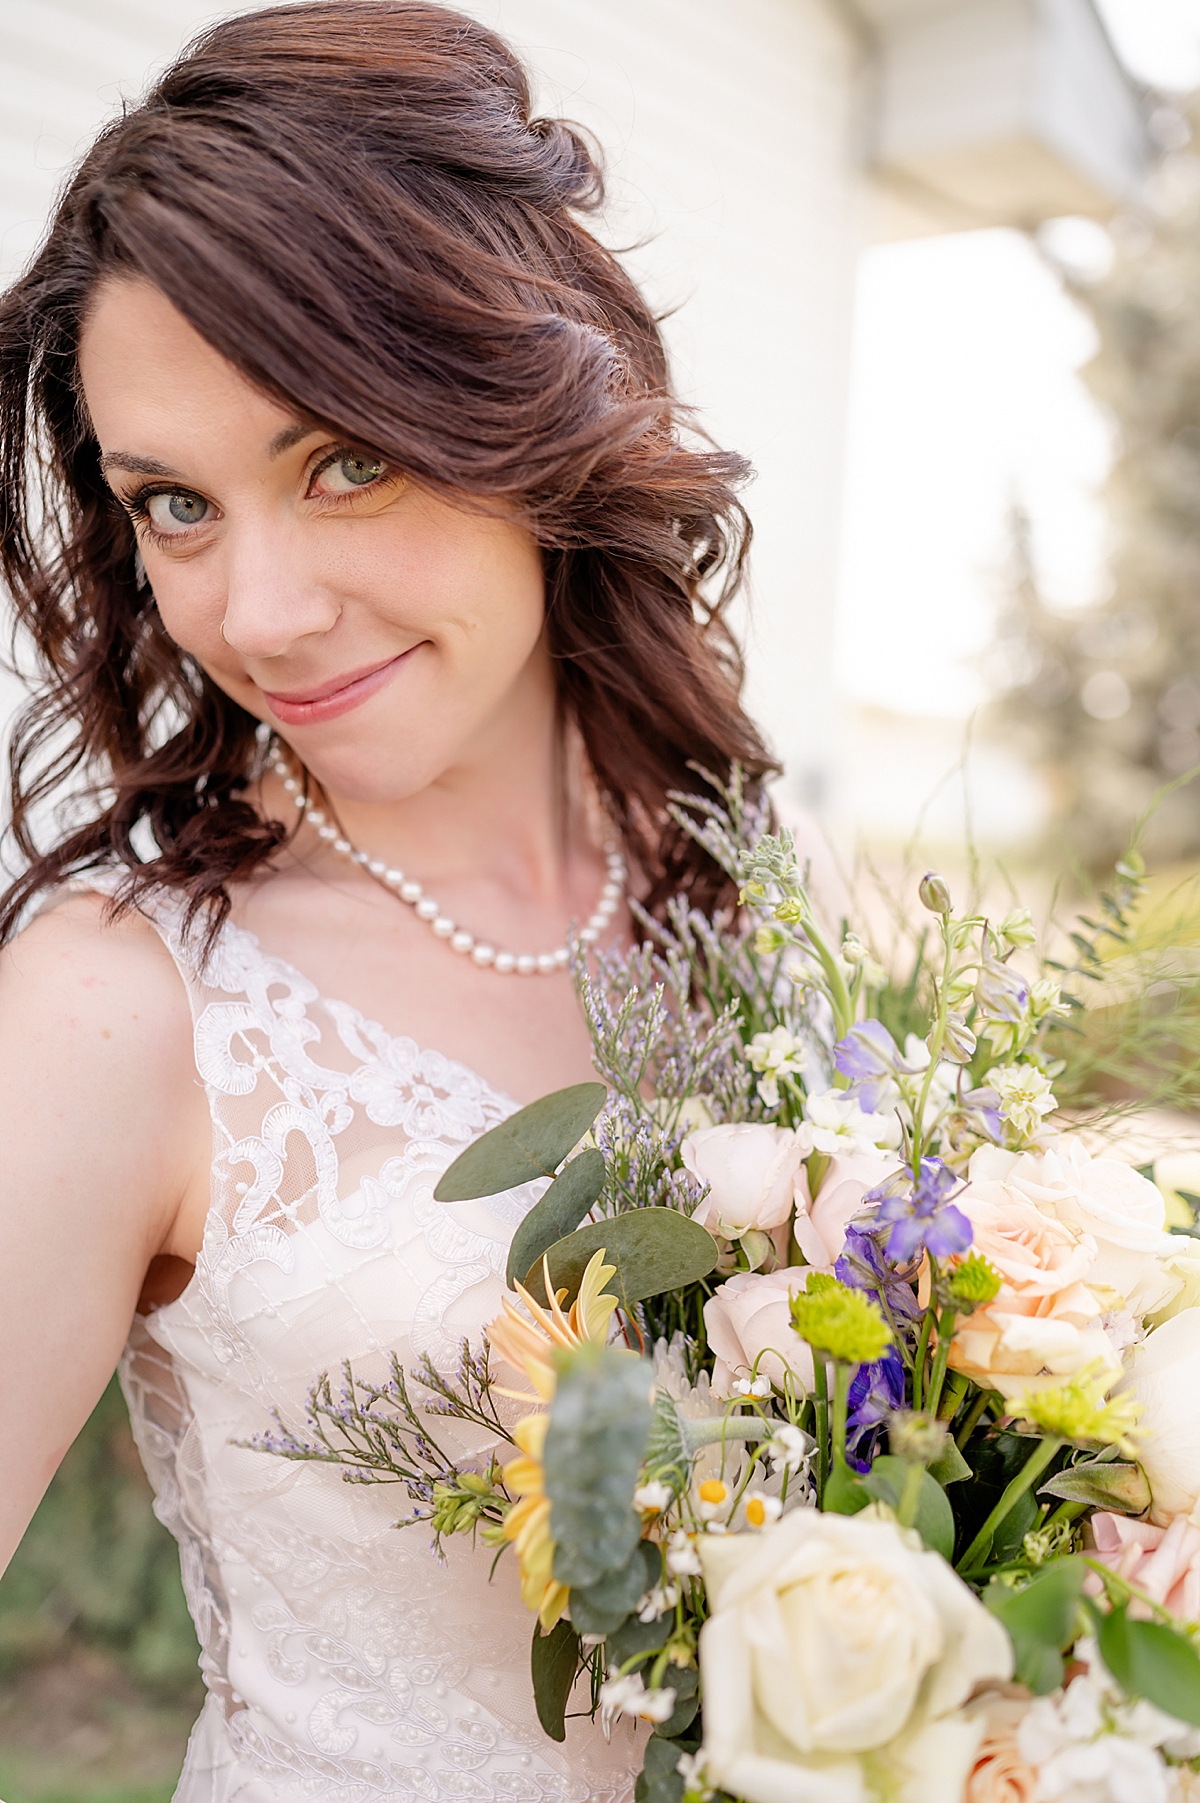 Close up photo of the bride and her flowers.